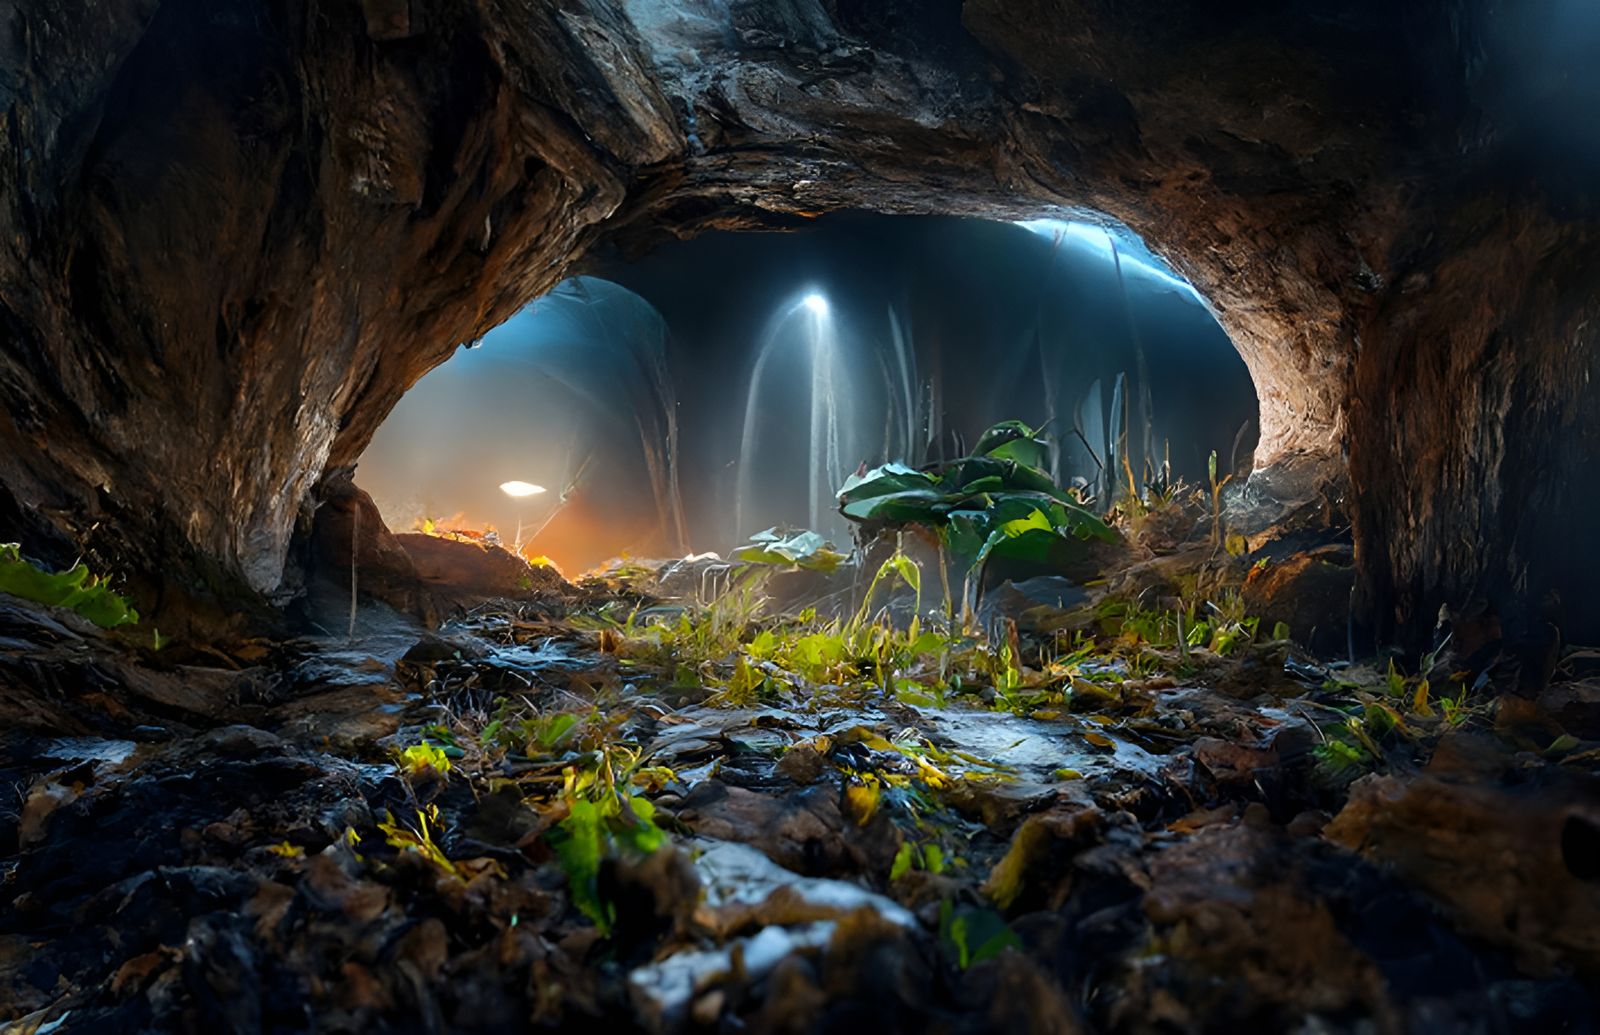 Haunting extraterrestrial cave